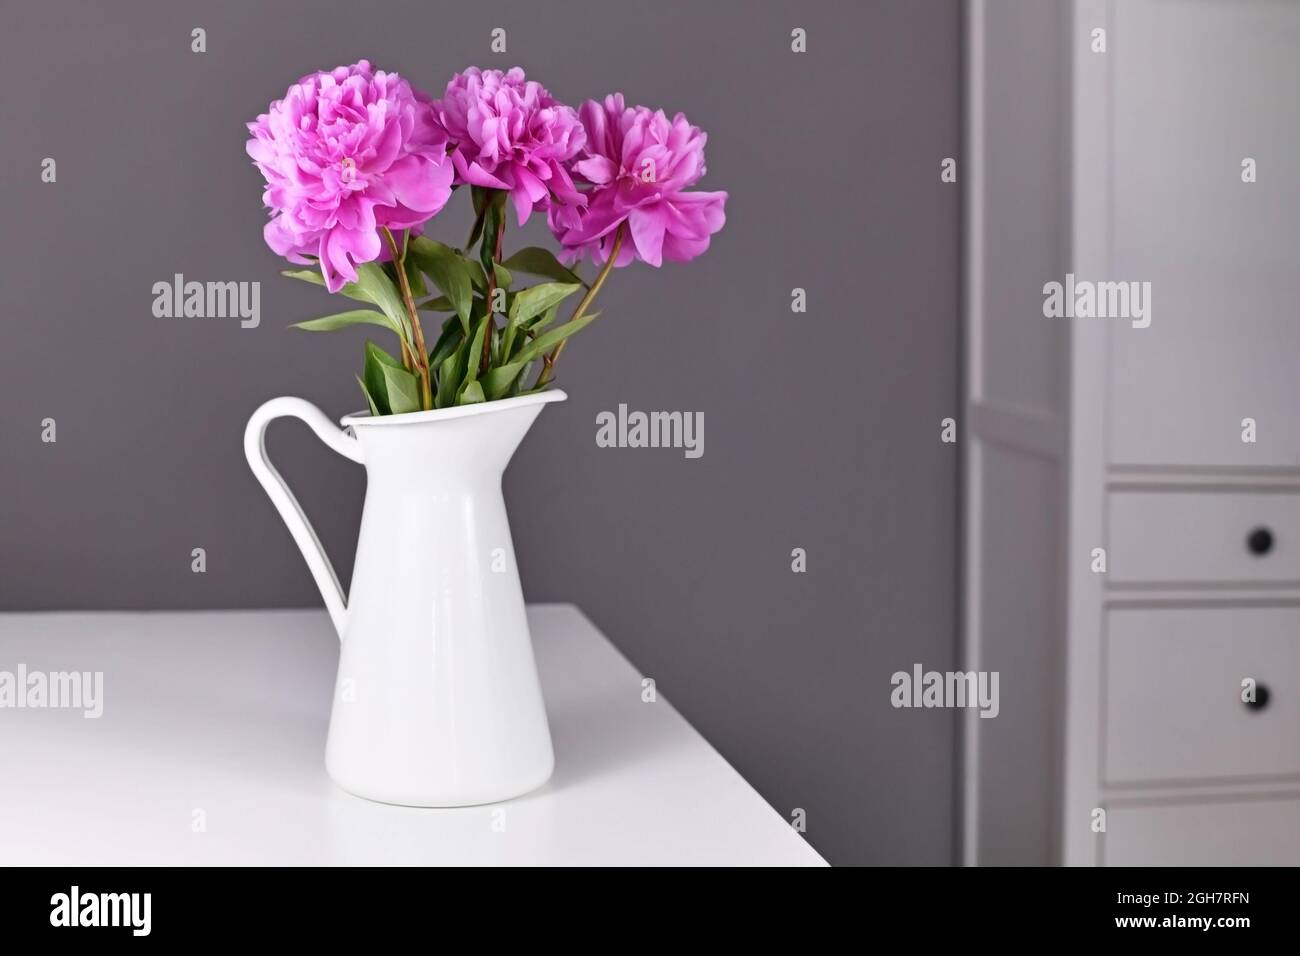 Pink bouquet of Chinese peony flowers in white vase on table in front of gray background Stock Photo